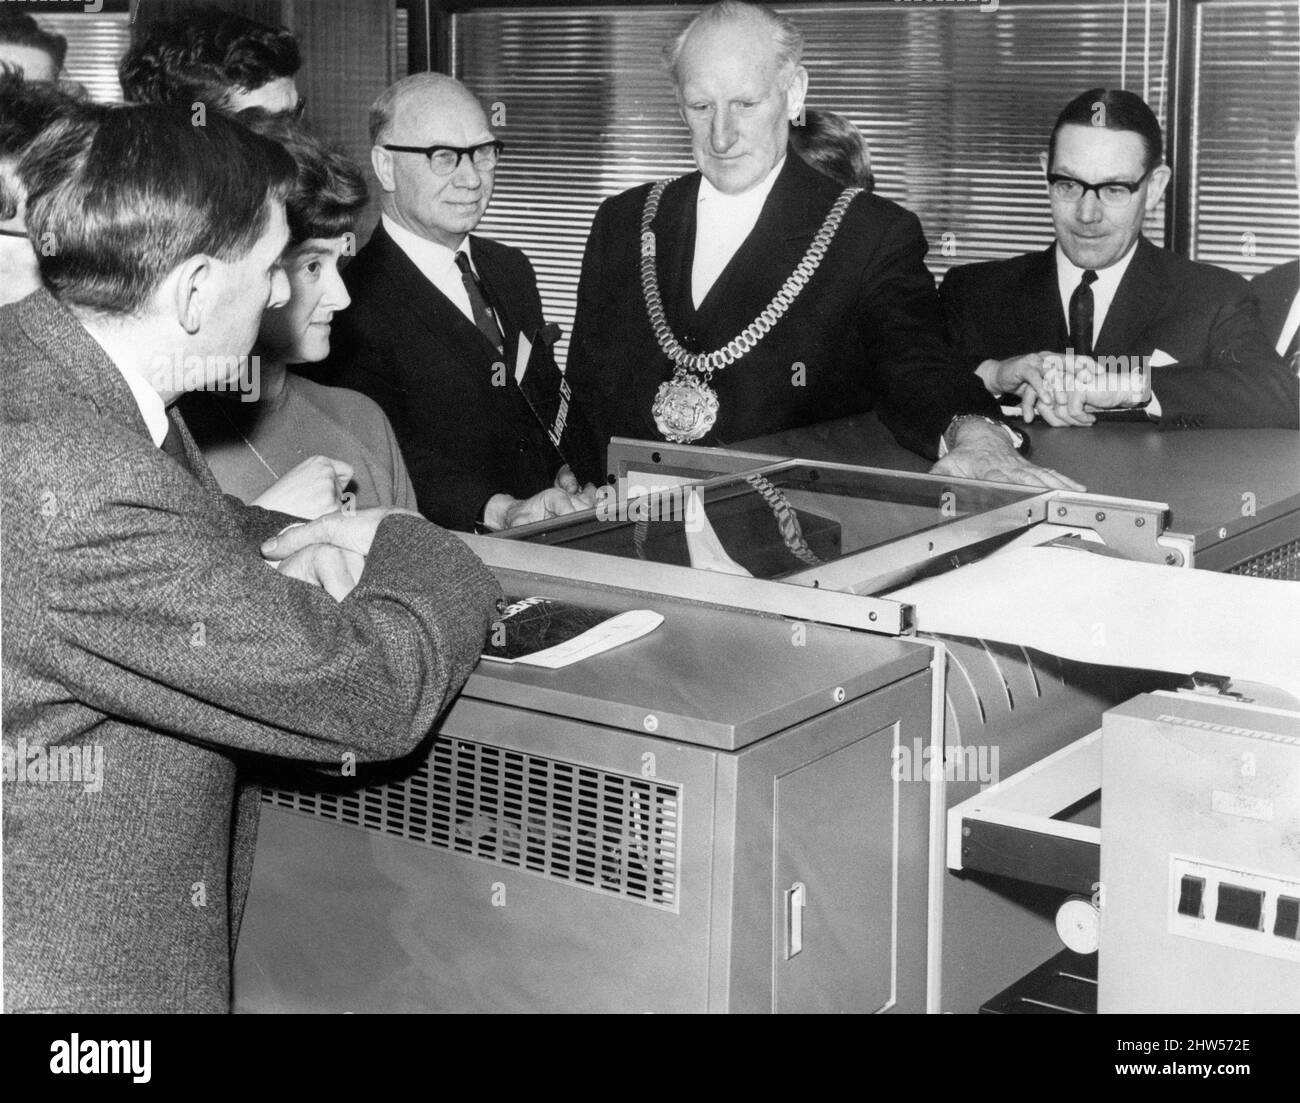 Liverpool Corporation's new assistant, a three hundred thousand computer, makes its debut when the Lord Mayor of Liverpool, Alderman Herbert Allen put the machine into operation by pressing a button, 19th April 1967. Also pictured are, Alderman David Cowley (left) and Mr J L Salt (city treasurer) right.  The computer, housed in a special air conditioned room in Commerce House, Sir Thomas Street, will eventually play a major role in the lives of Liverpool people, dealing with such differing subjects as rate records  and child vaccination. Stock Photo